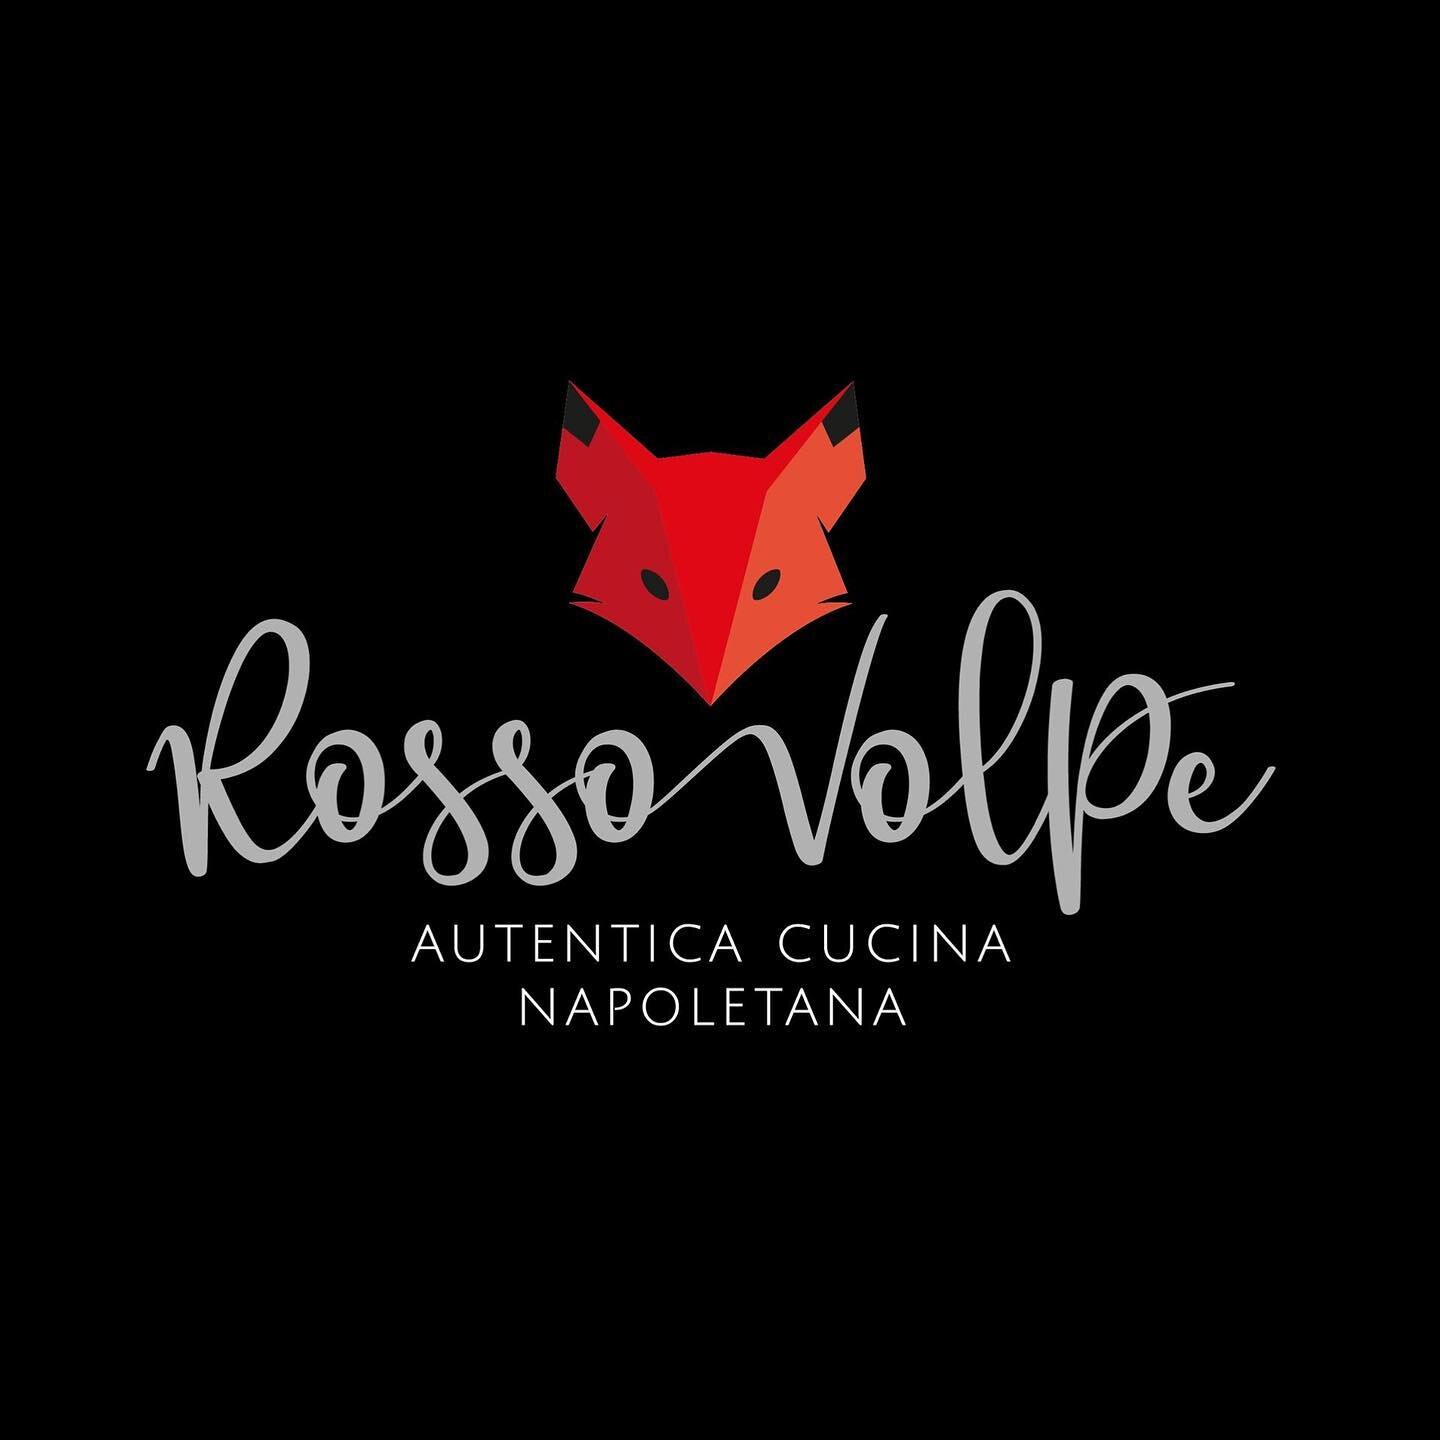 Another new and exciting branding commission - Rosso Volpe!
Neapolitan food loving entrepreneur and owner has chosen Cosanostra Design to brand his latest new venture. We shared similar ground with the owners&rsquo; passion and flair for authenticity